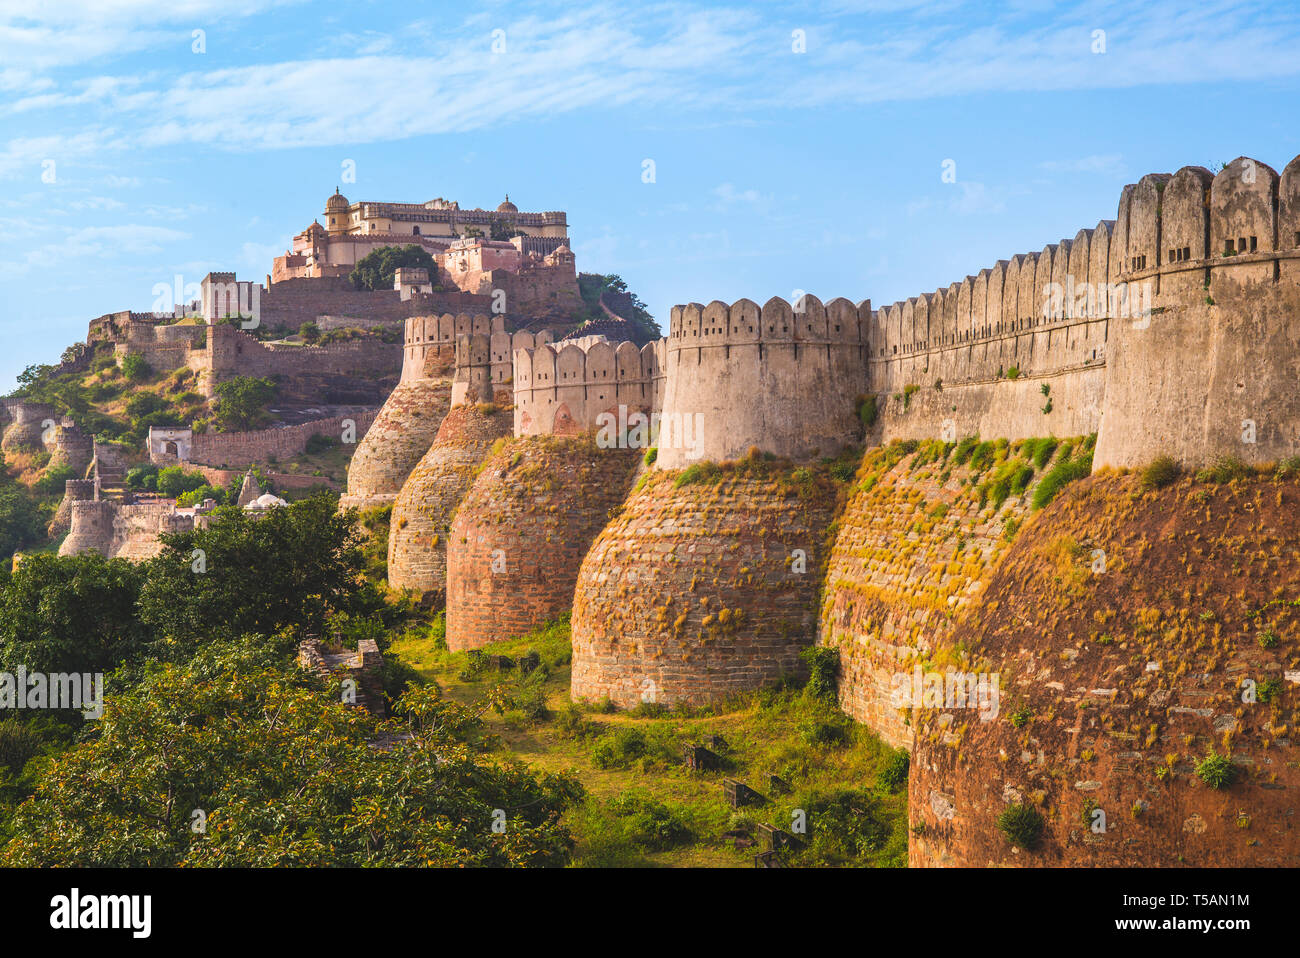 Kumbhalgarh fort and wall in rajasthan, india Stock Photo